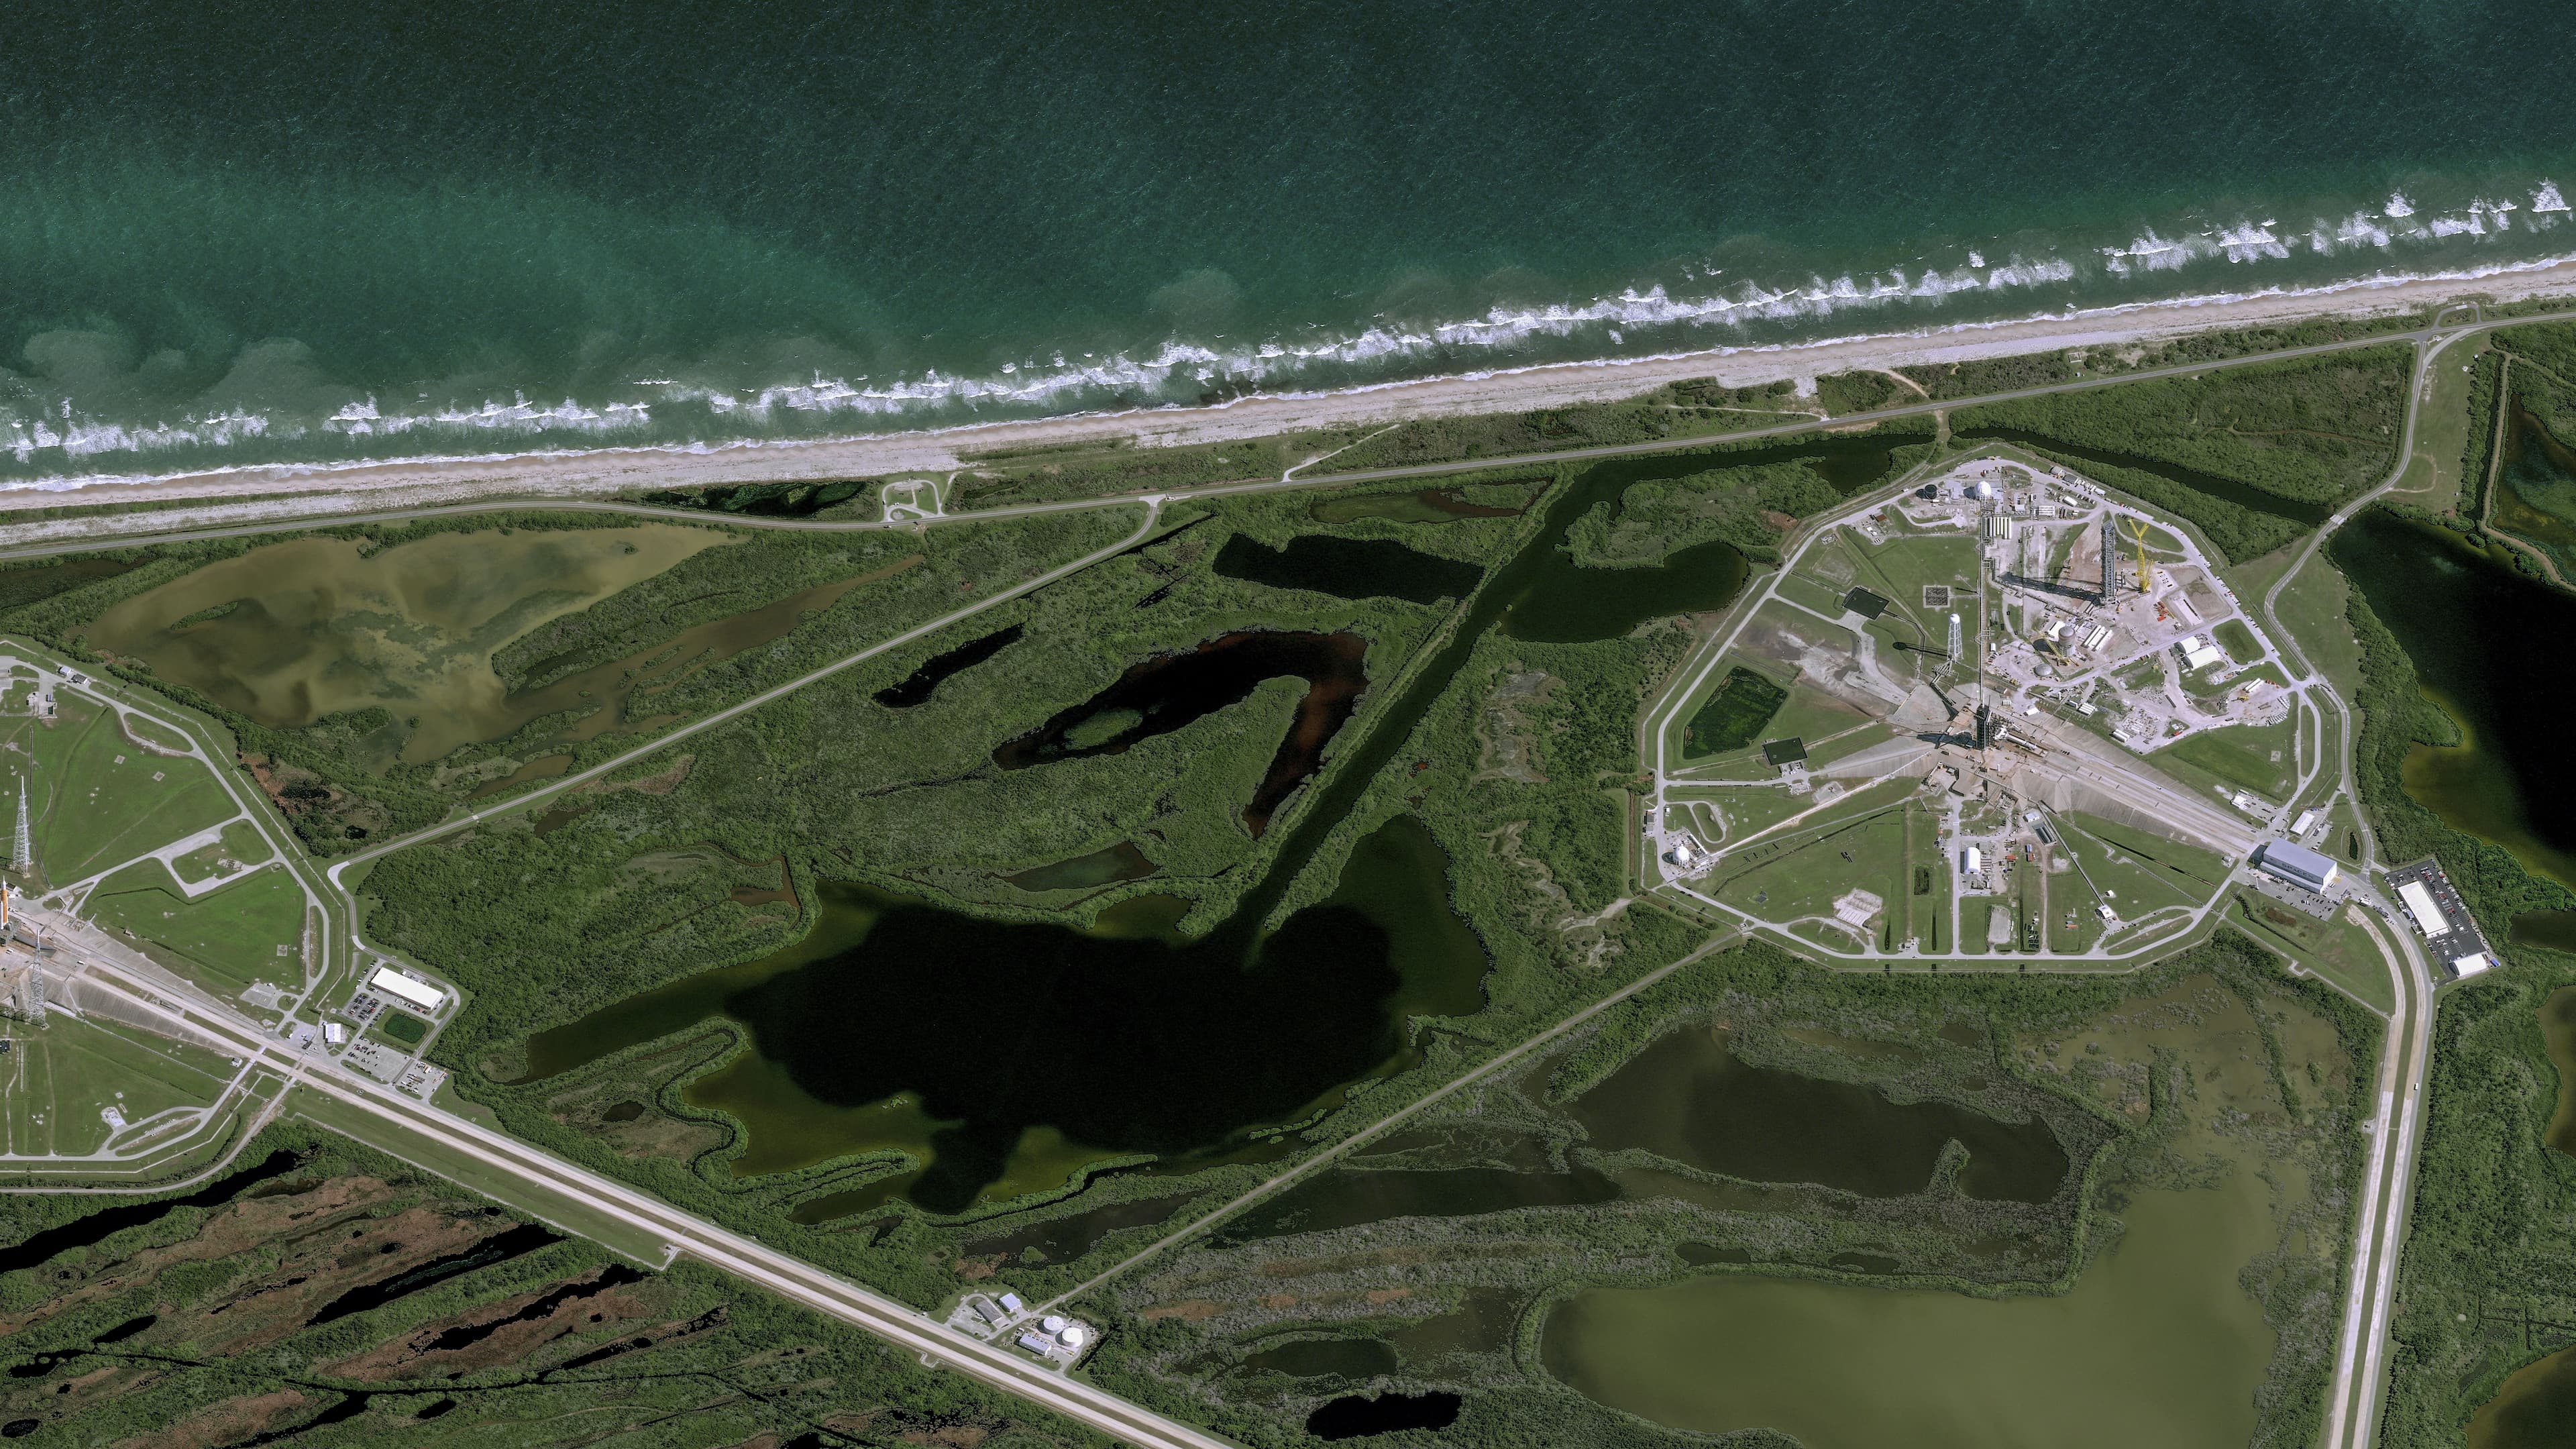 léiades Neo  - Cape Canaveral Air Force Station, Florida